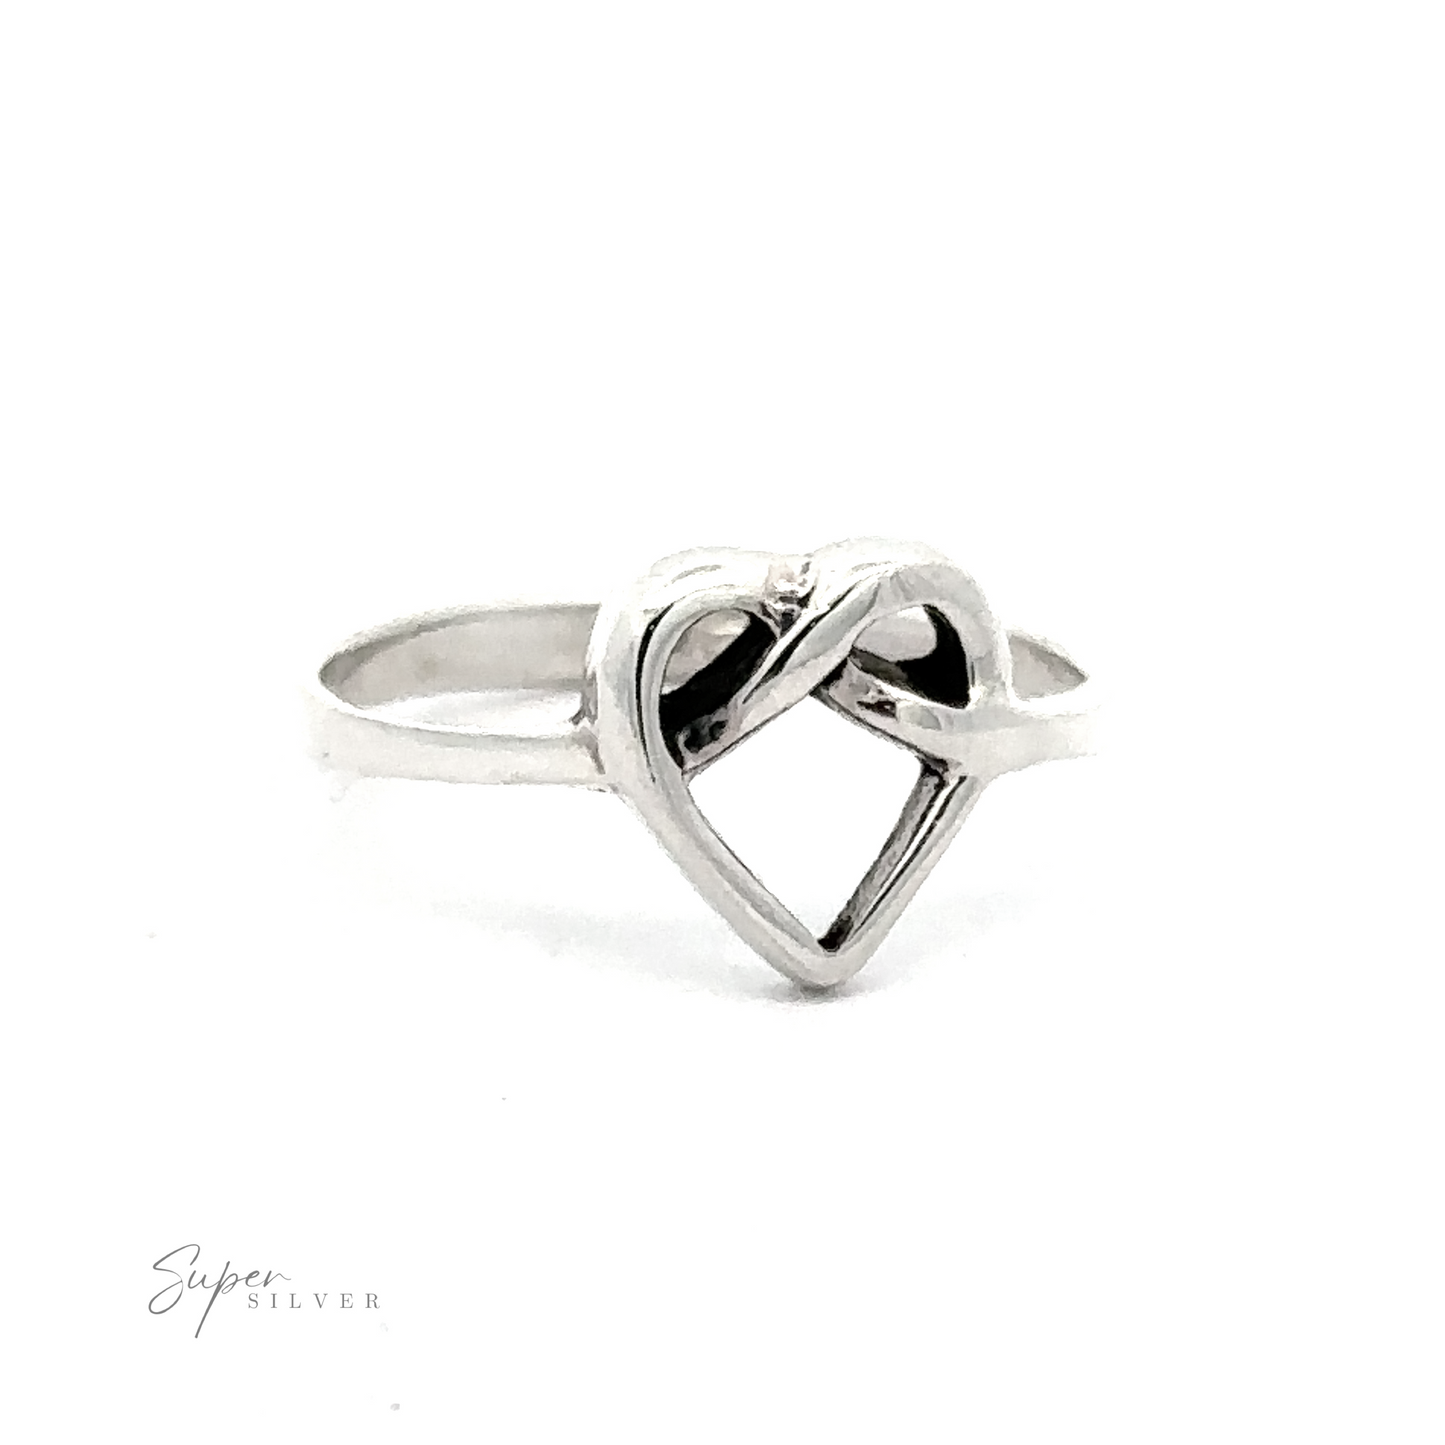 Entwined Heart Knot Ring featuring a heart knot design with an intertwined loop at the top, displayed against a white background with a subtle signature at the bottom left.